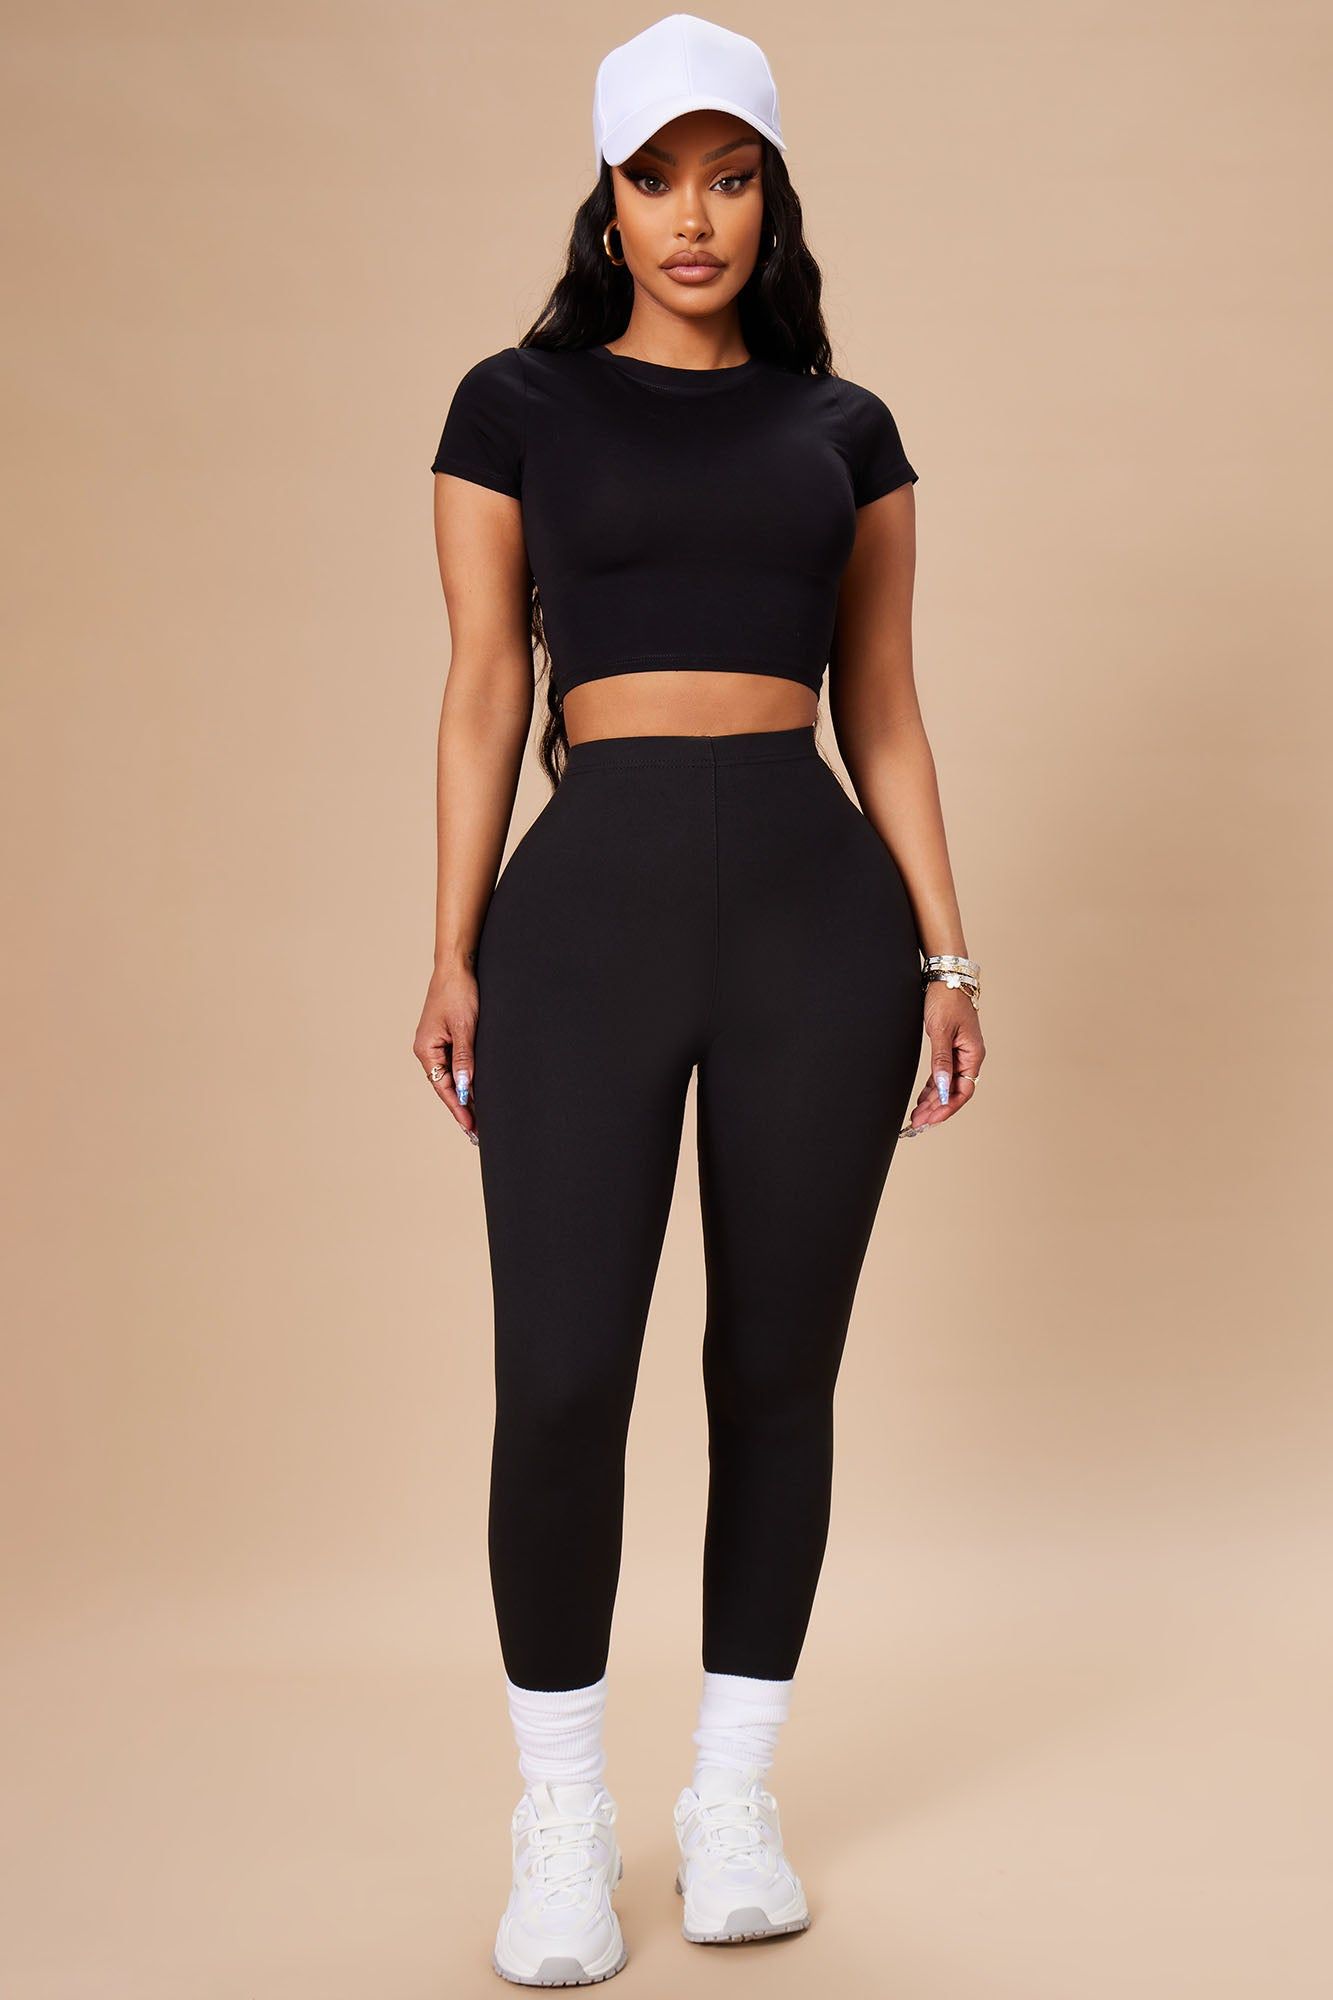 Women's Almost Every Day Leggings in Black Size Large by Fashion Nova